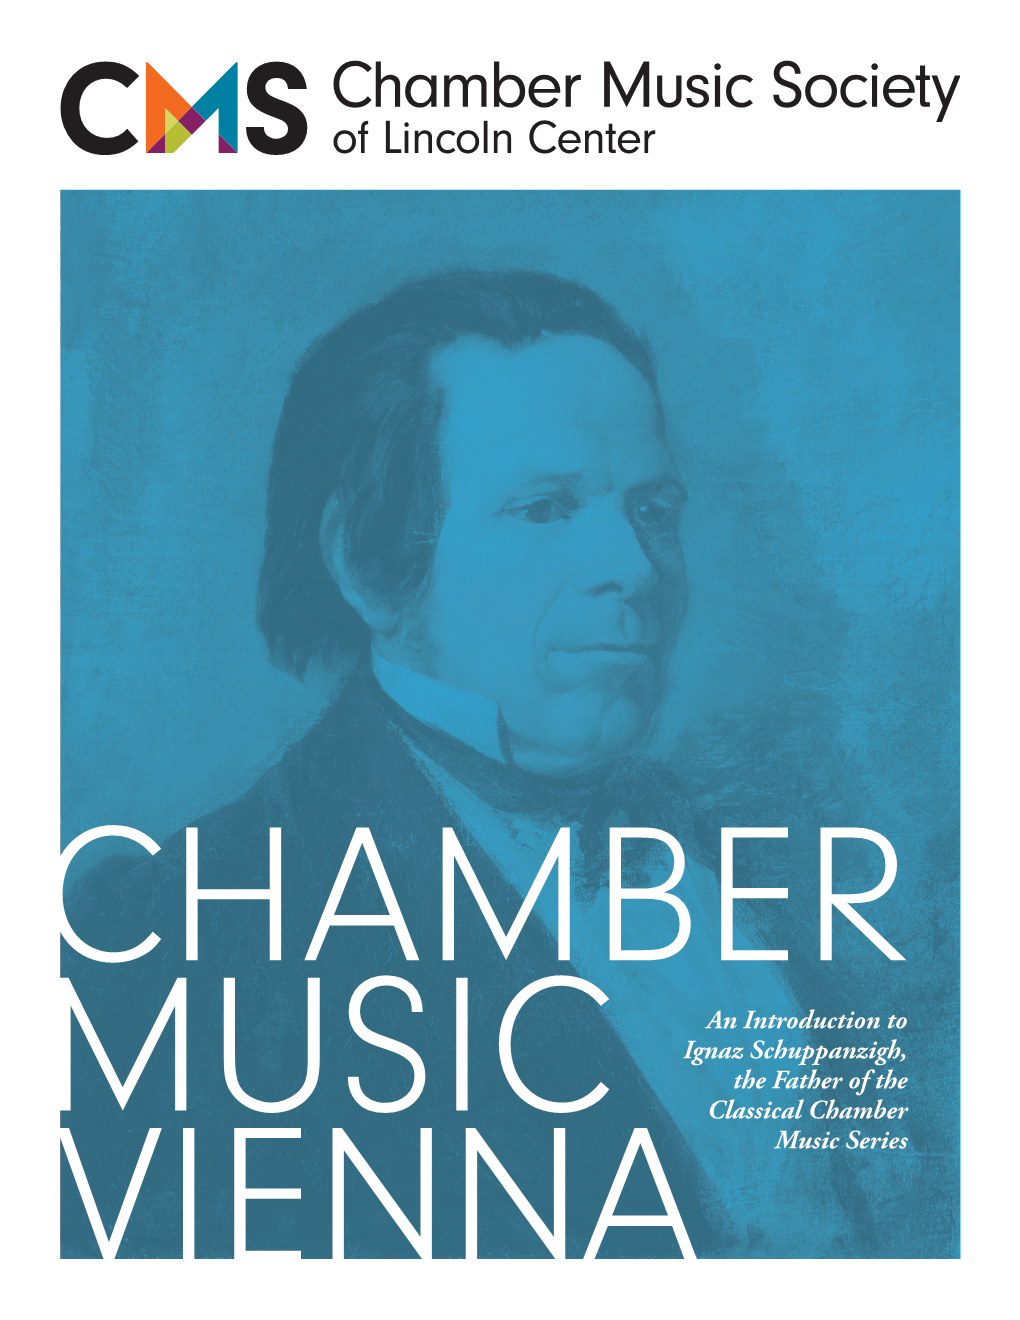 An Introduction to Ignaz Schuppanzigh, the Father of the Classical Chamber Music Series